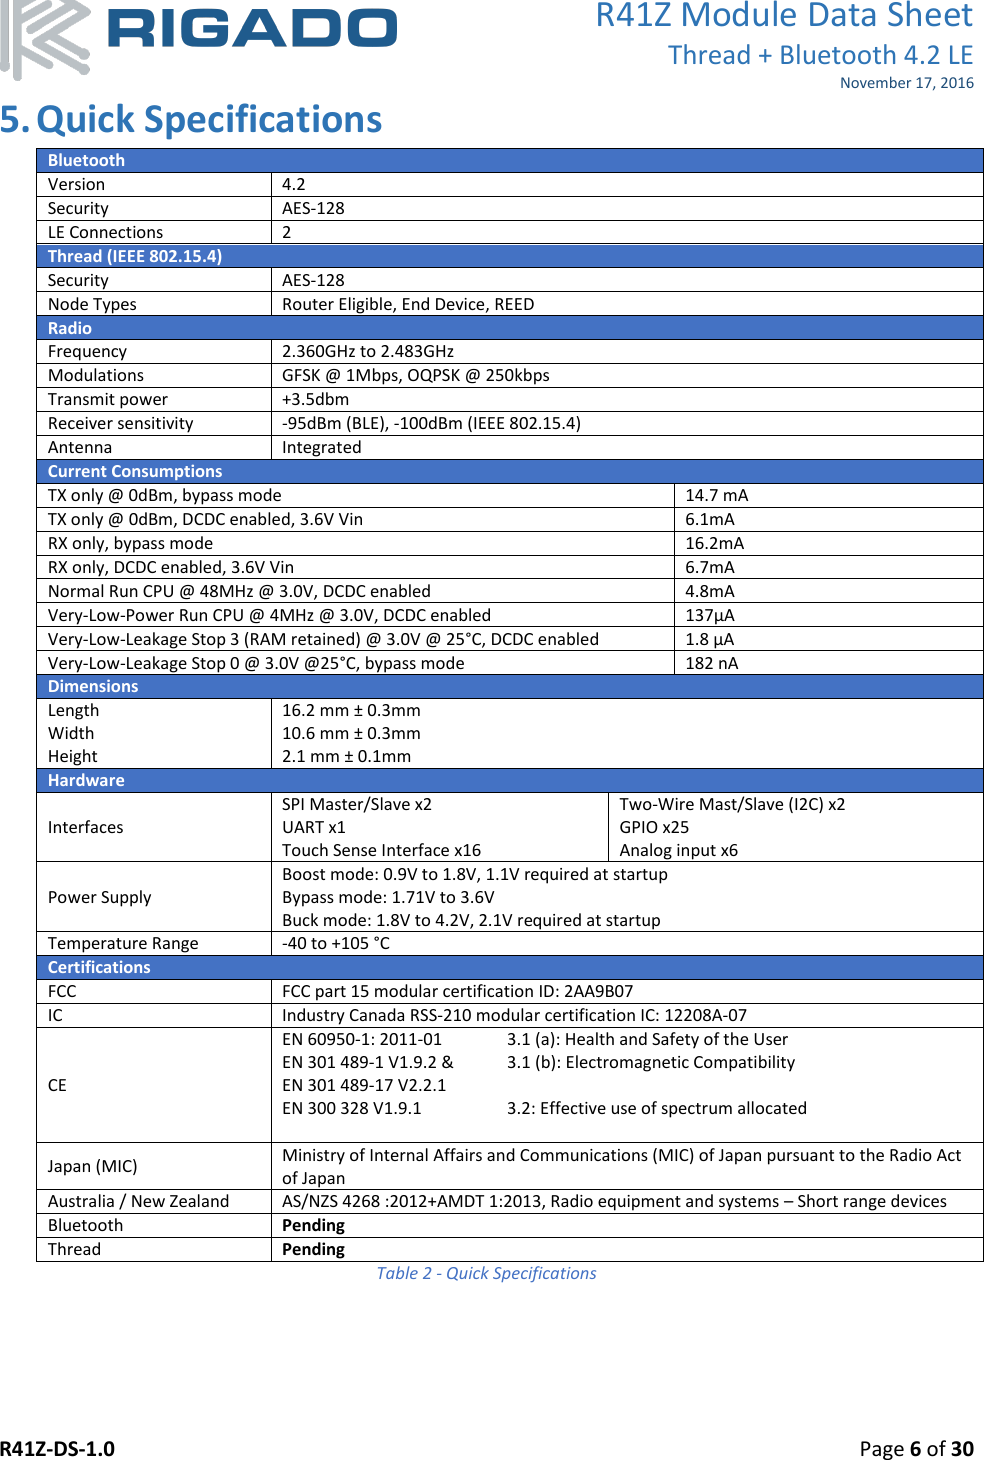 R41Z Module Data Sheet Thread + Bluetooth 4.2 LE November 17, 2016 R41Z-DS-1.0    Page 6 of 30  5. Quick Specifications Bluetooth Version 4.2 Security AES-128 LE Connections 2 Thread (IEEE 802.15.4) Security AES-128 Node Types Router Eligible, End Device, REED Radio Frequency 2.360GHz to 2.483GHz Modulations GFSK @ 1Mbps, OQPSK @ 250kbps Transmit power +3.5dbm Receiver sensitivity -95dBm (BLE), -100dBm (IEEE 802.15.4) Antenna Integrated Current Consumptions TX only @ 0dBm, bypass mode 14.7 mA TX only @ 0dBm, DCDC enabled, 3.6V Vin 6.1mA RX only, bypass mode 16.2mA RX only, DCDC enabled, 3.6V Vin 6.7mA Normal Run CPU @ 48MHz @ 3.0V, DCDC enabled 4.8mA Very-Low-Power Run CPU @ 4MHz @ 3.0V, DCDC enabled 137µA Very-Low-Leakage Stop 3 (RAM retained) @ 3.0V @ 25°C, DCDC enabled 1.8 µA Very-Low-Leakage Stop 0 @ 3.0V @25°C, bypass mode 182 nA Dimensions Length Width Height 16.2 mm ± 0.3mm 10.6 mm ± 0.3mm 2.1 mm ± 0.1mm Hardware Interfaces SPI Master/Slave x2 UART x1 Touch Sense Interface x16 Two-Wire Mast/Slave (I2C) x2 GPIO x25 Analog input x6 Power Supply Boost mode: 0.9V to 1.8V, 1.1V required at startup  Bypass mode: 1.71V to 3.6V Buck mode: 1.8V to 4.2V, 2.1V required at startup Temperature Range -40 to +105 °C Certifications FCC FCC part 15 modular certification ID: 2AA9B07 IC Industry Canada RSS-210 modular certification IC: 12208A-07  CE EN 60950-1: 2011-01  3.1 (a): Health and Safety of the User EN 301 489-1 V1.9.2 &amp;  3.1 (b): Electromagnetic Compatibility EN 301 489-17 V2.2.1   EN 300 328 V1.9.1    3.2: Effective use of spectrum allocated  Japan (MIC) Ministry of Internal Affairs and Communications (MIC) of Japan pursuant to the Radio Act of Japan  Australia / New Zealand AS/NZS 4268 :2012+AMDT 1:2013, Radio equipment and systems – Short range devices  Bluetooth Pending Thread Pending Table 2 - Quick Specifications 